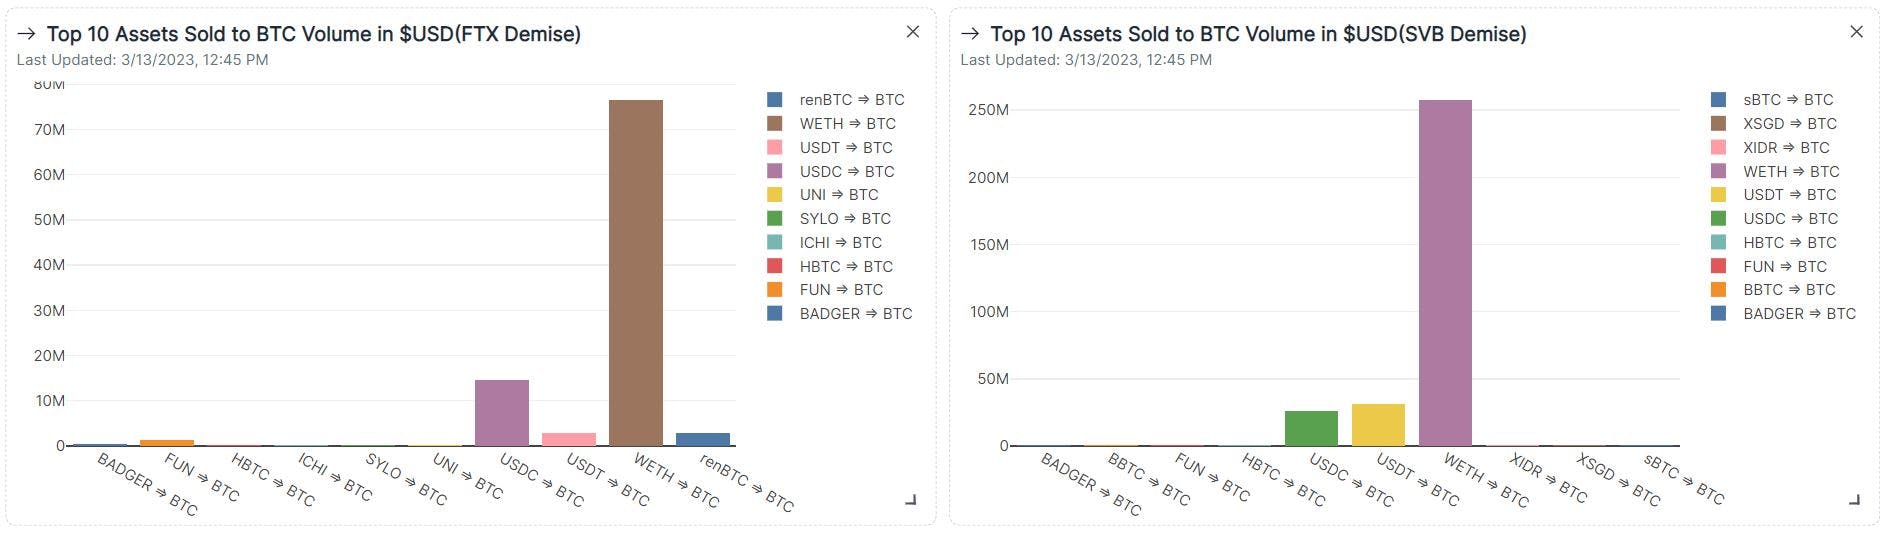 Top 10 most volume(in $USD) assets swapped to BTC